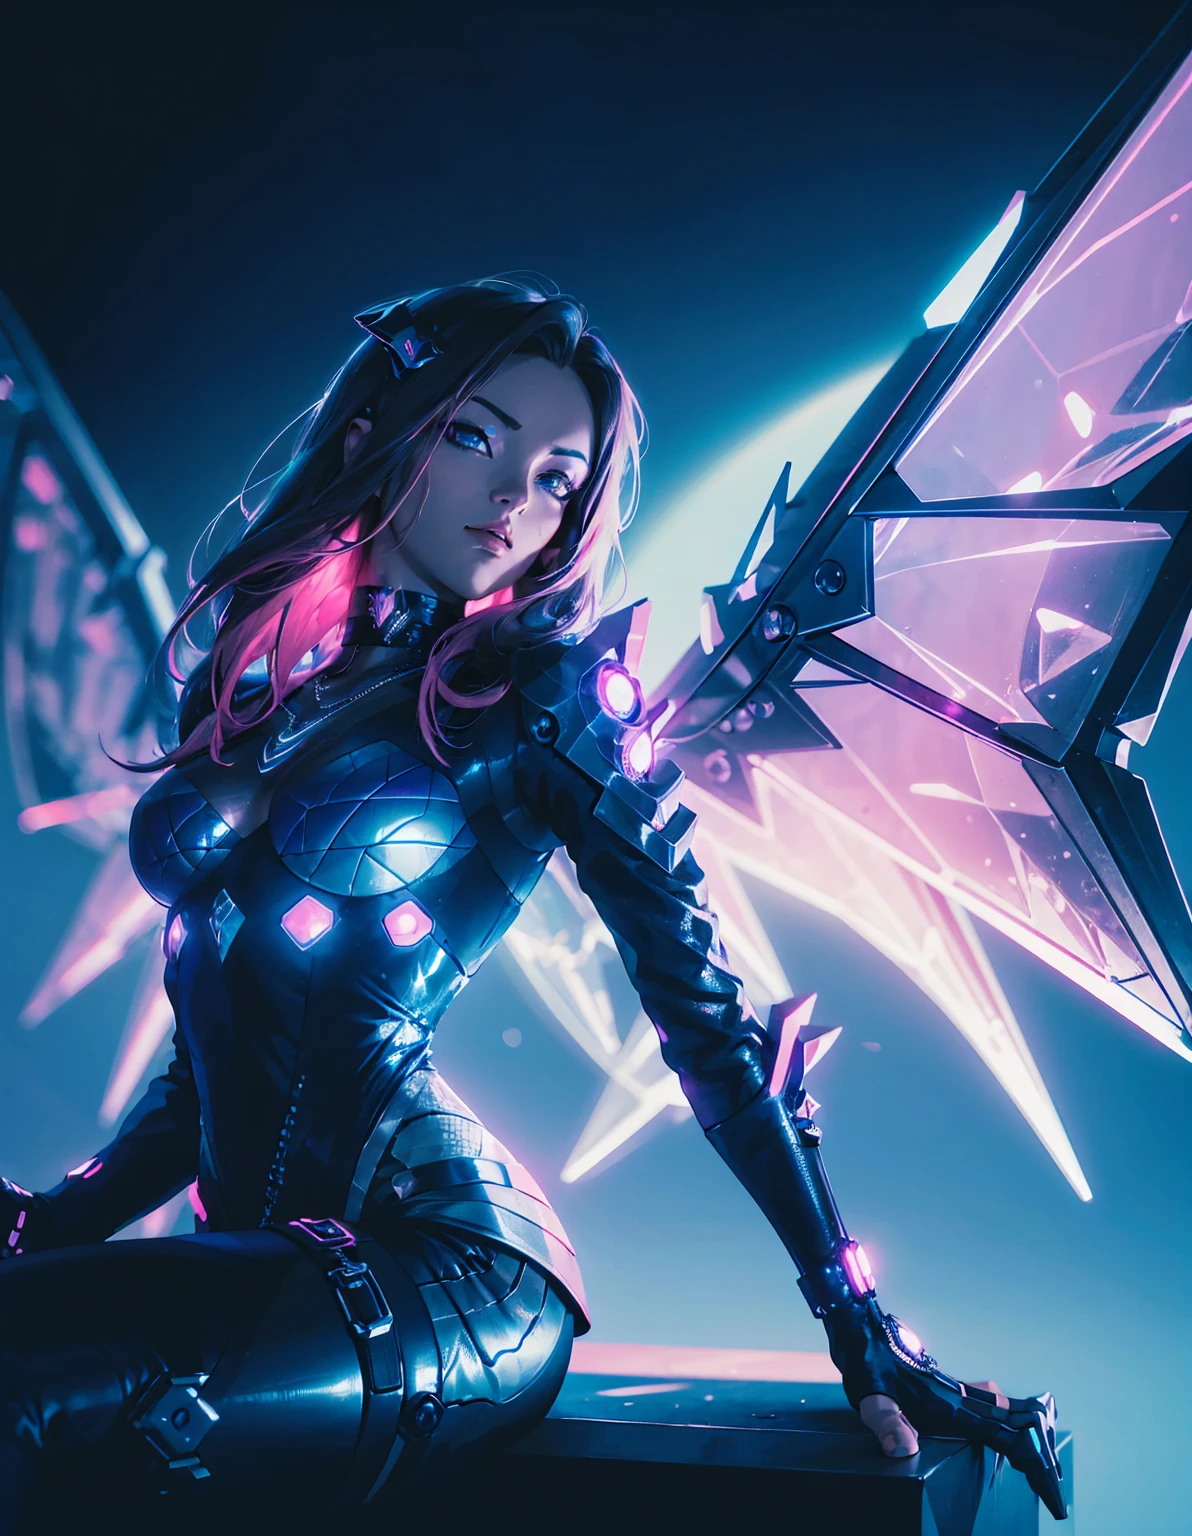 A cyberpunk girl with a futuristic look, featuring mechanical wings and horns, sitting in a dynamic pose. She has dark hair with neon highlights and is wearing a black outfit with a blue jacket. The background is a simple vibrant, neon-lit cityscape with blue and pink hues, emphasizing the high-tech, sci-fi atmosphere. --ar 3:4 --stylize 1000 --niji 6
